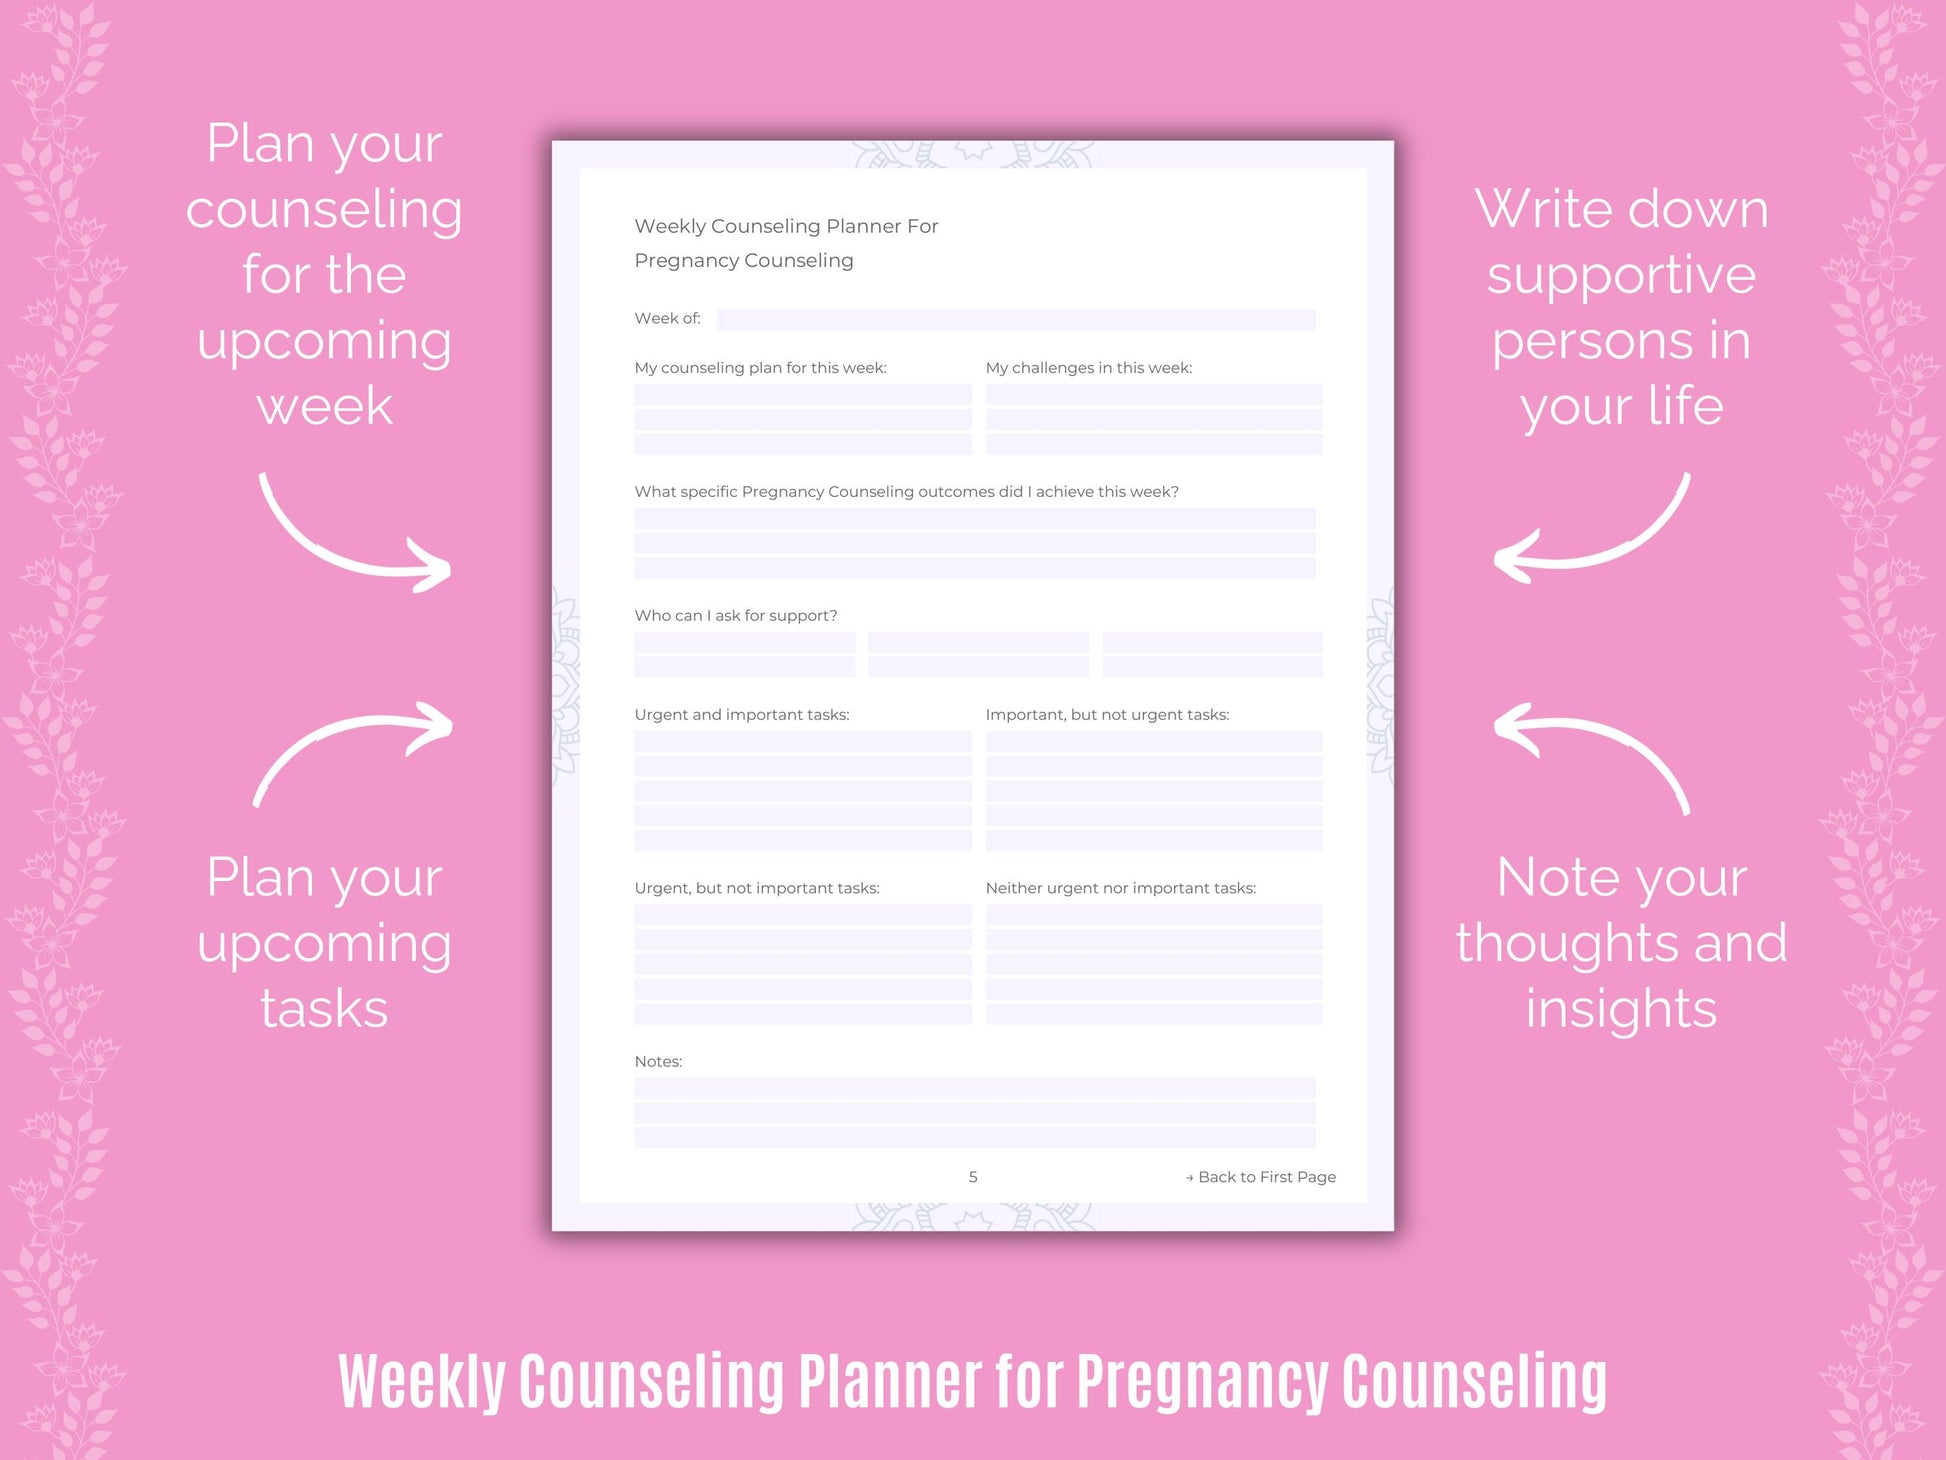 Pregnancy Counseling